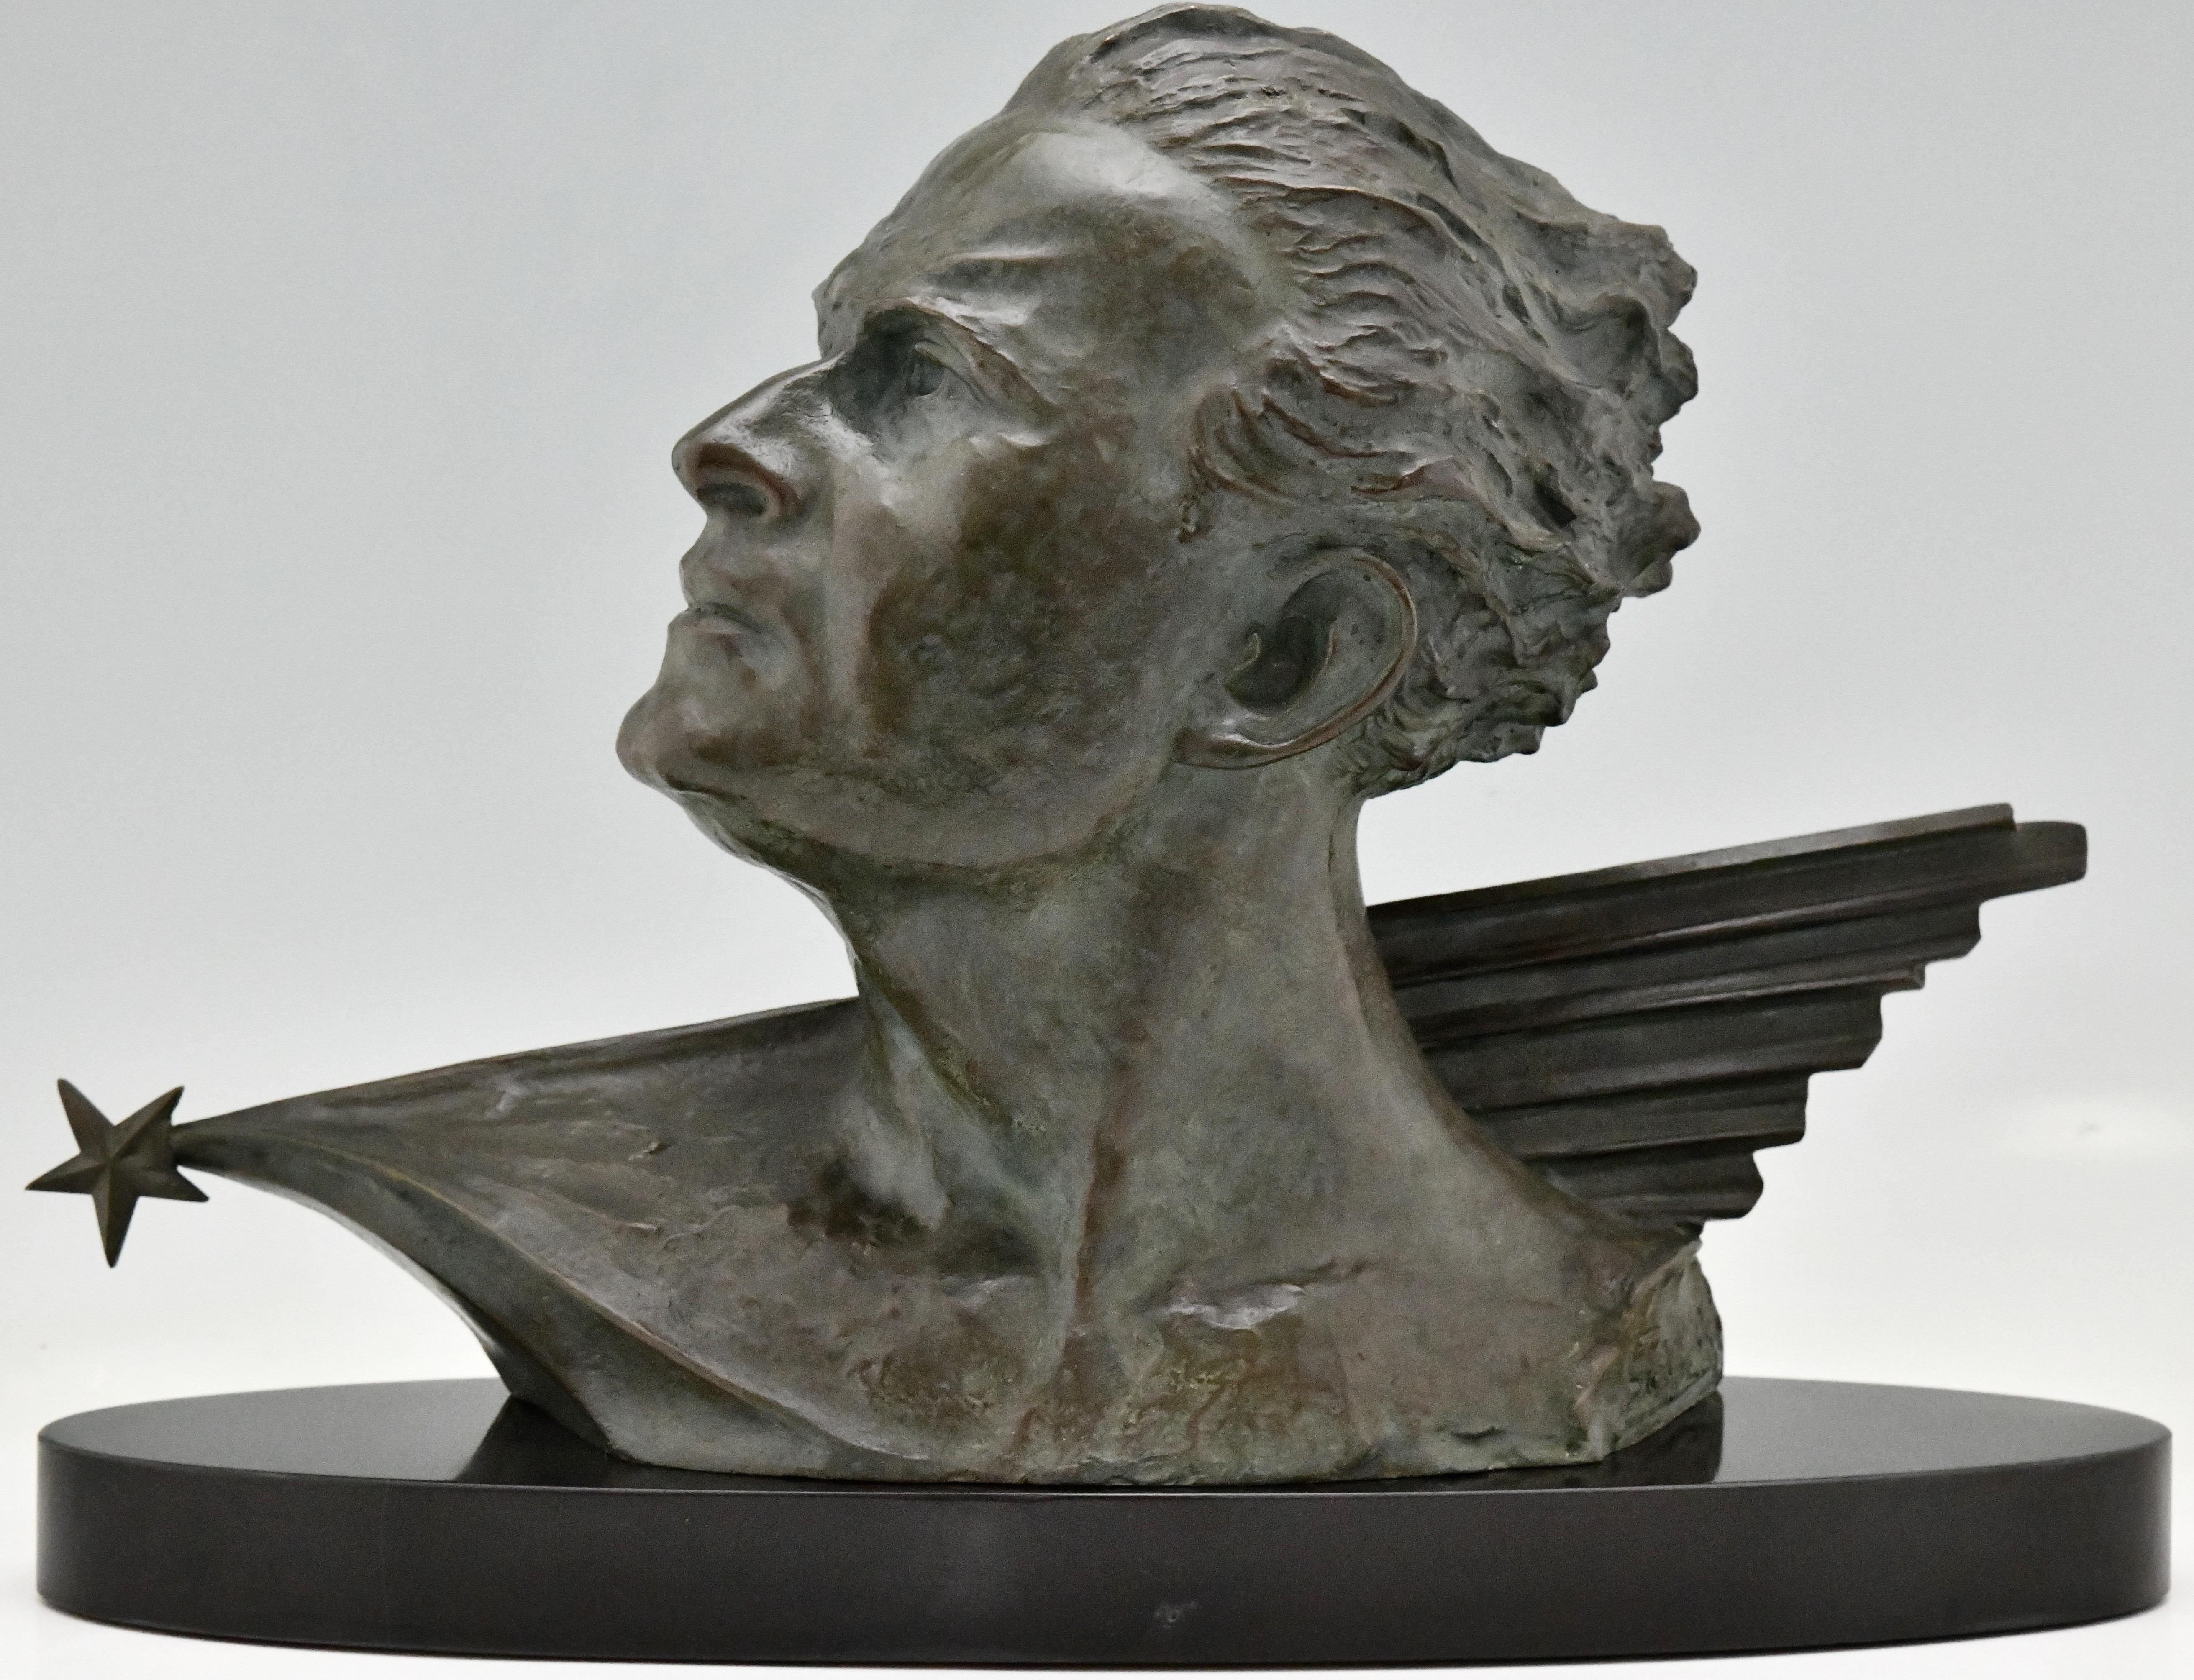 Art Deco bronze sculpture, male bust of the French aviator and hero Jean Mermoz who lived from 1901 until 1930. The sculpture is signed by Frederic C. Focht, stamped Bronze, number 3. Beautiful green patina with ligher shades. The bust is mounted on